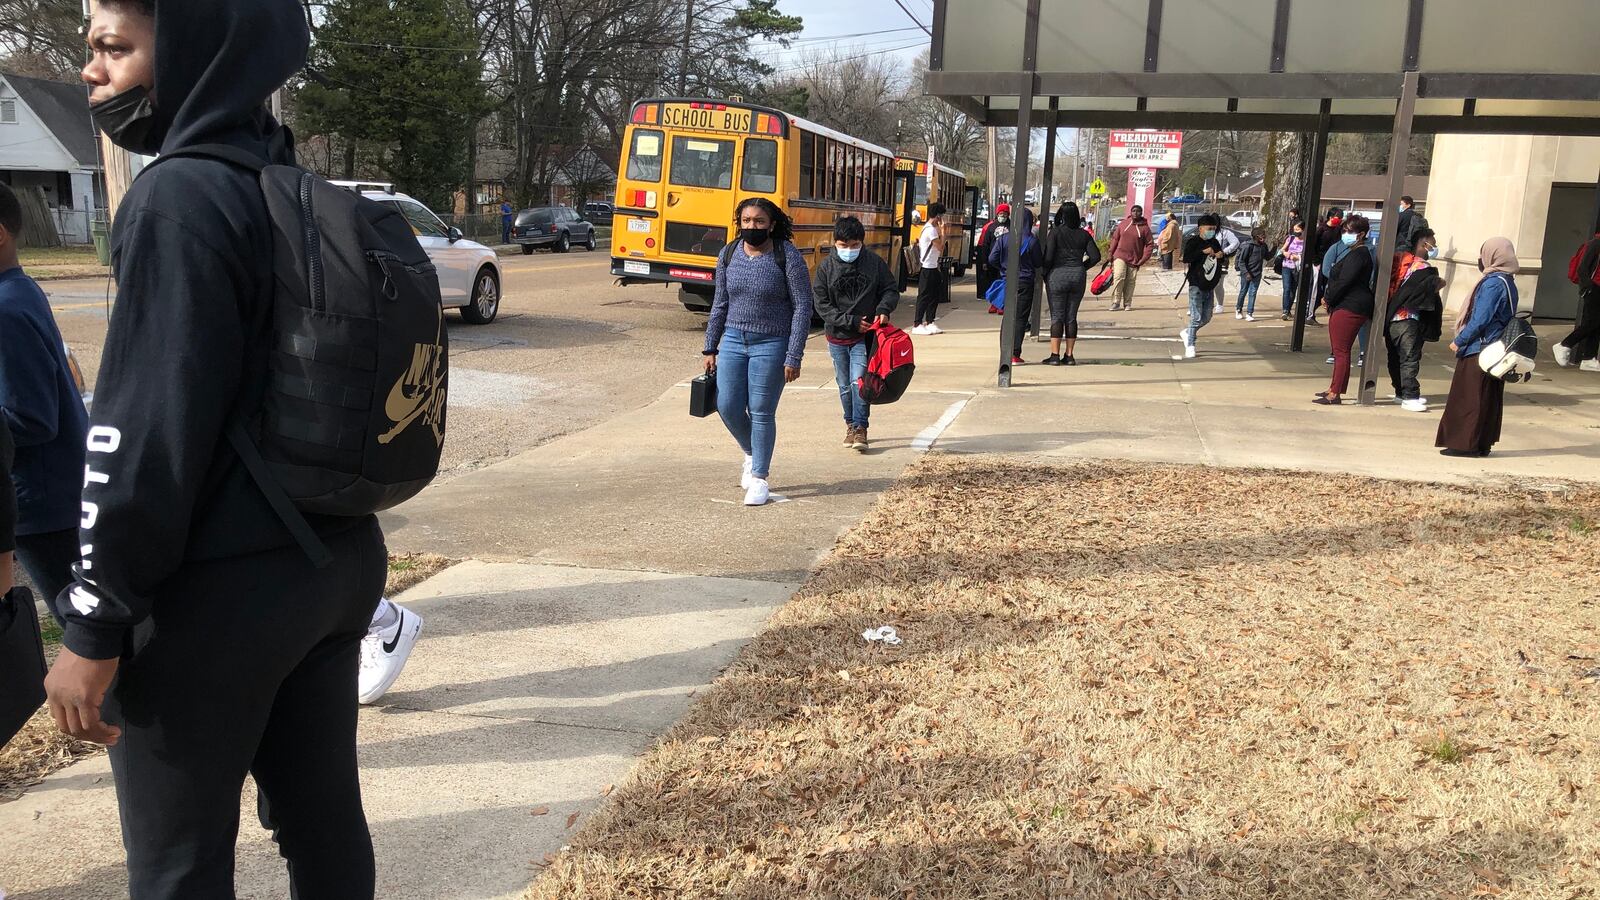 Students leave school for the day following afternoon dismissal.